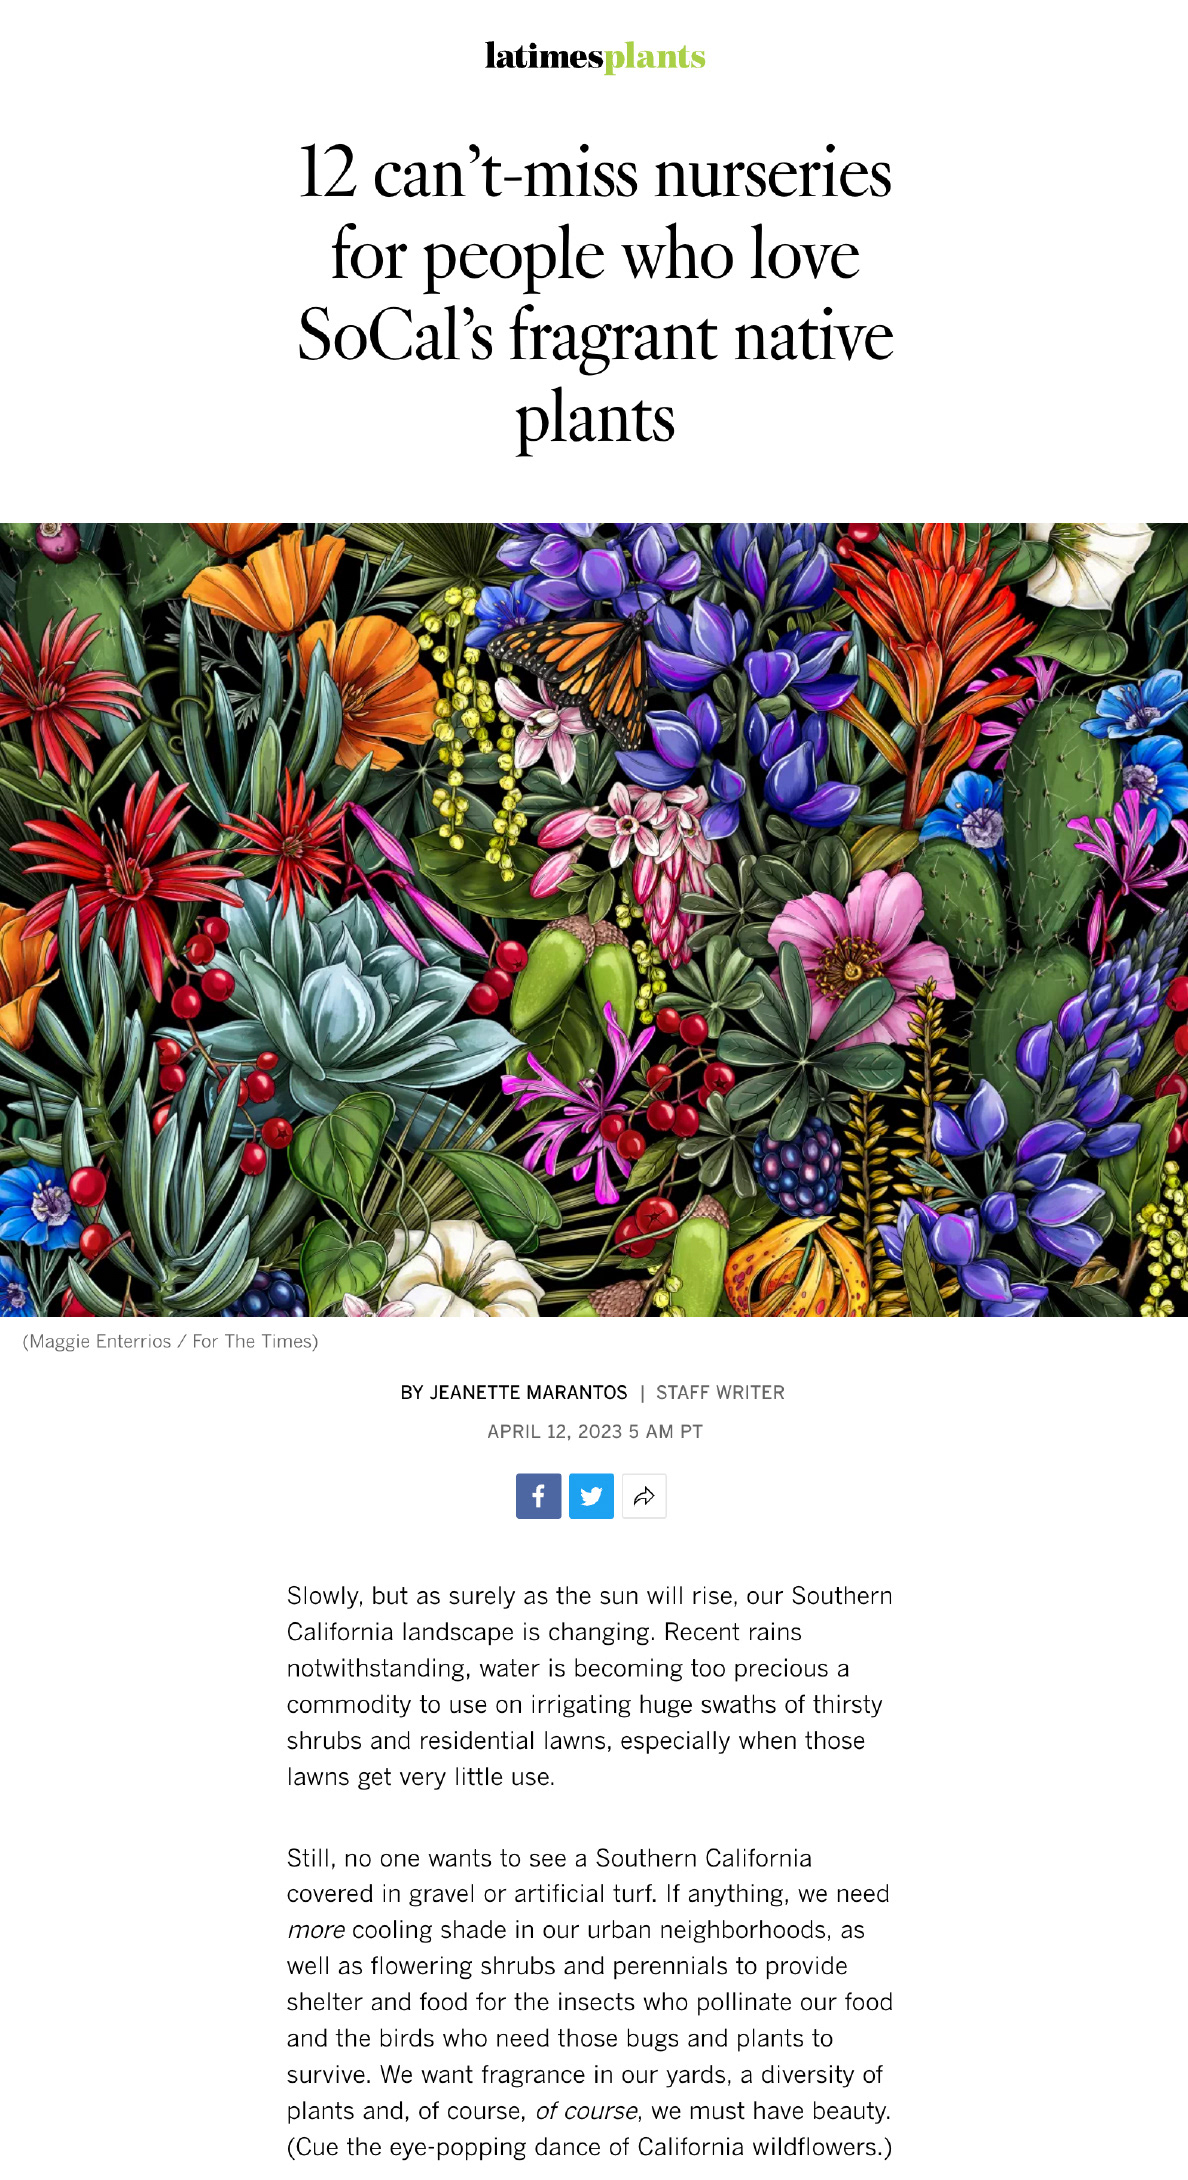 Botanical illustration by Maggie Enterrios for the LA Times featuring California native plants